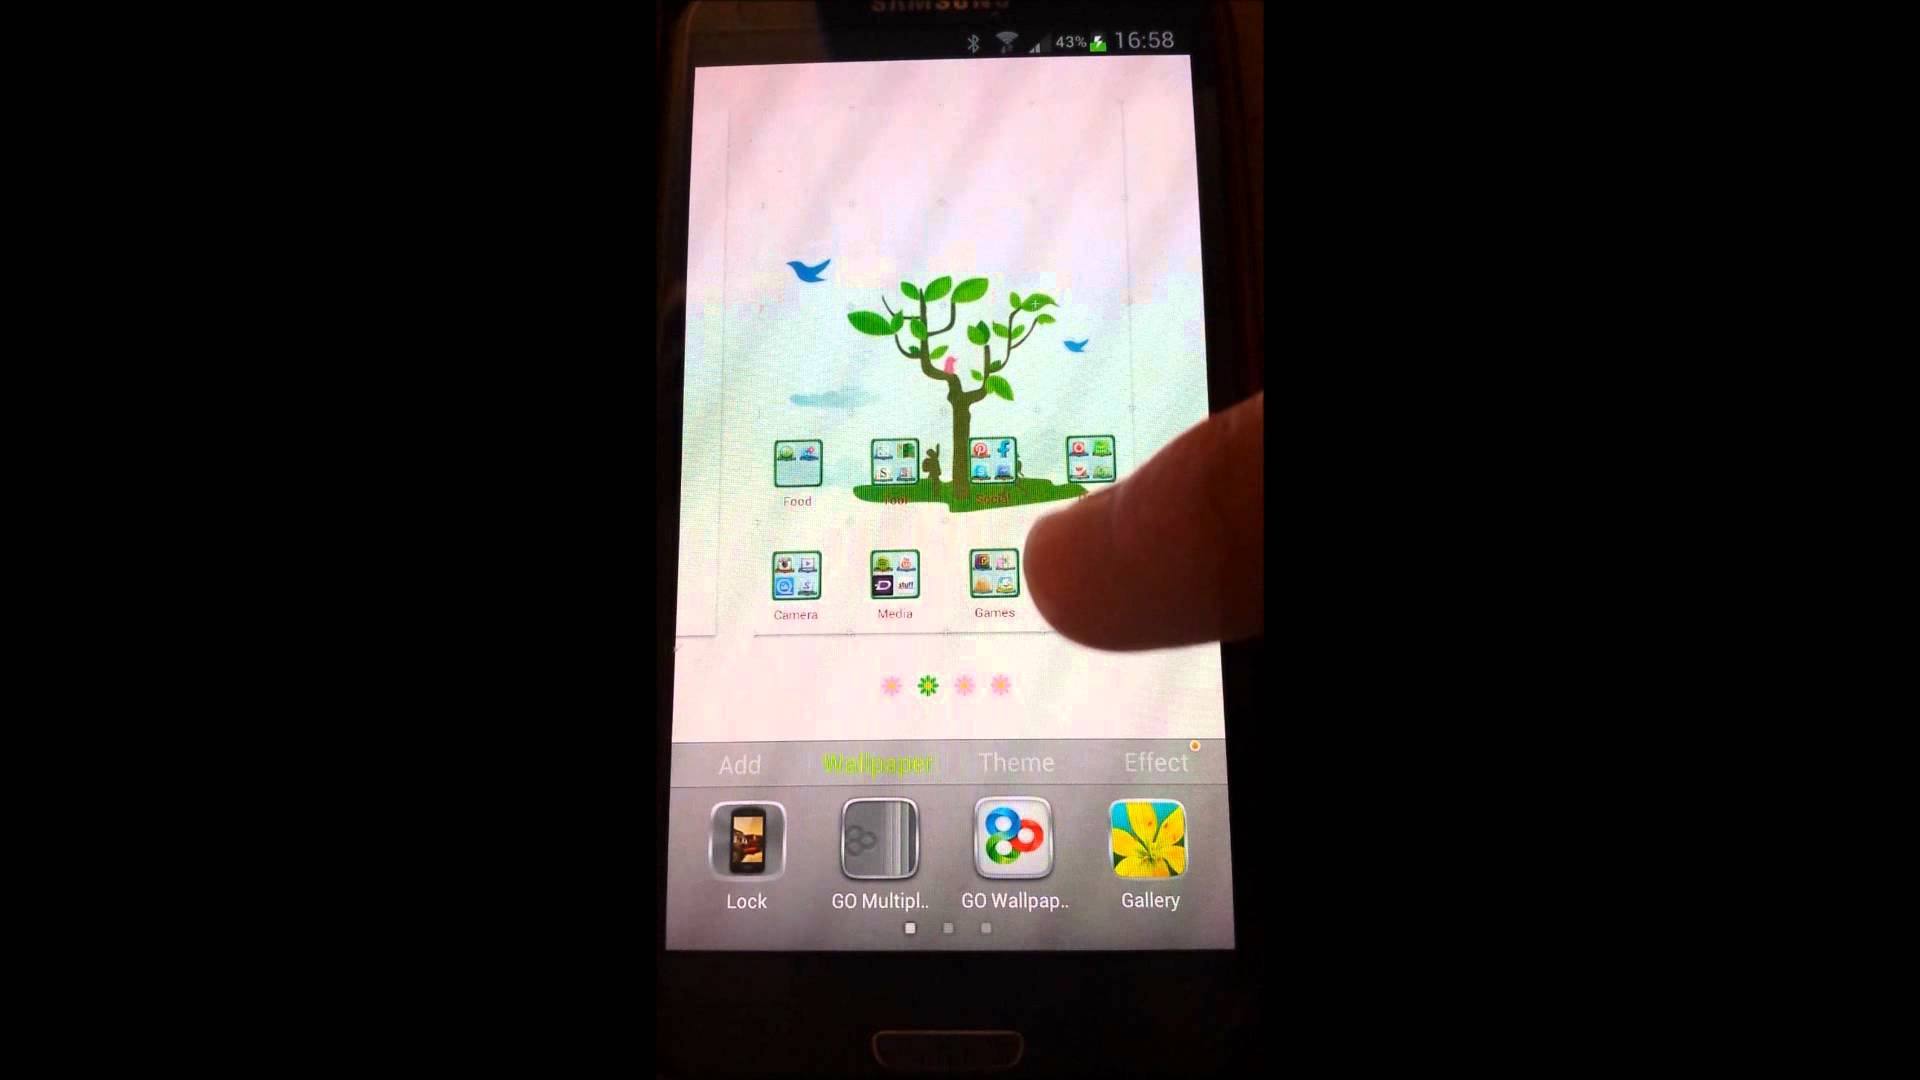 Tutorial: Set Up Android Video Live Wallpaper - YouTube